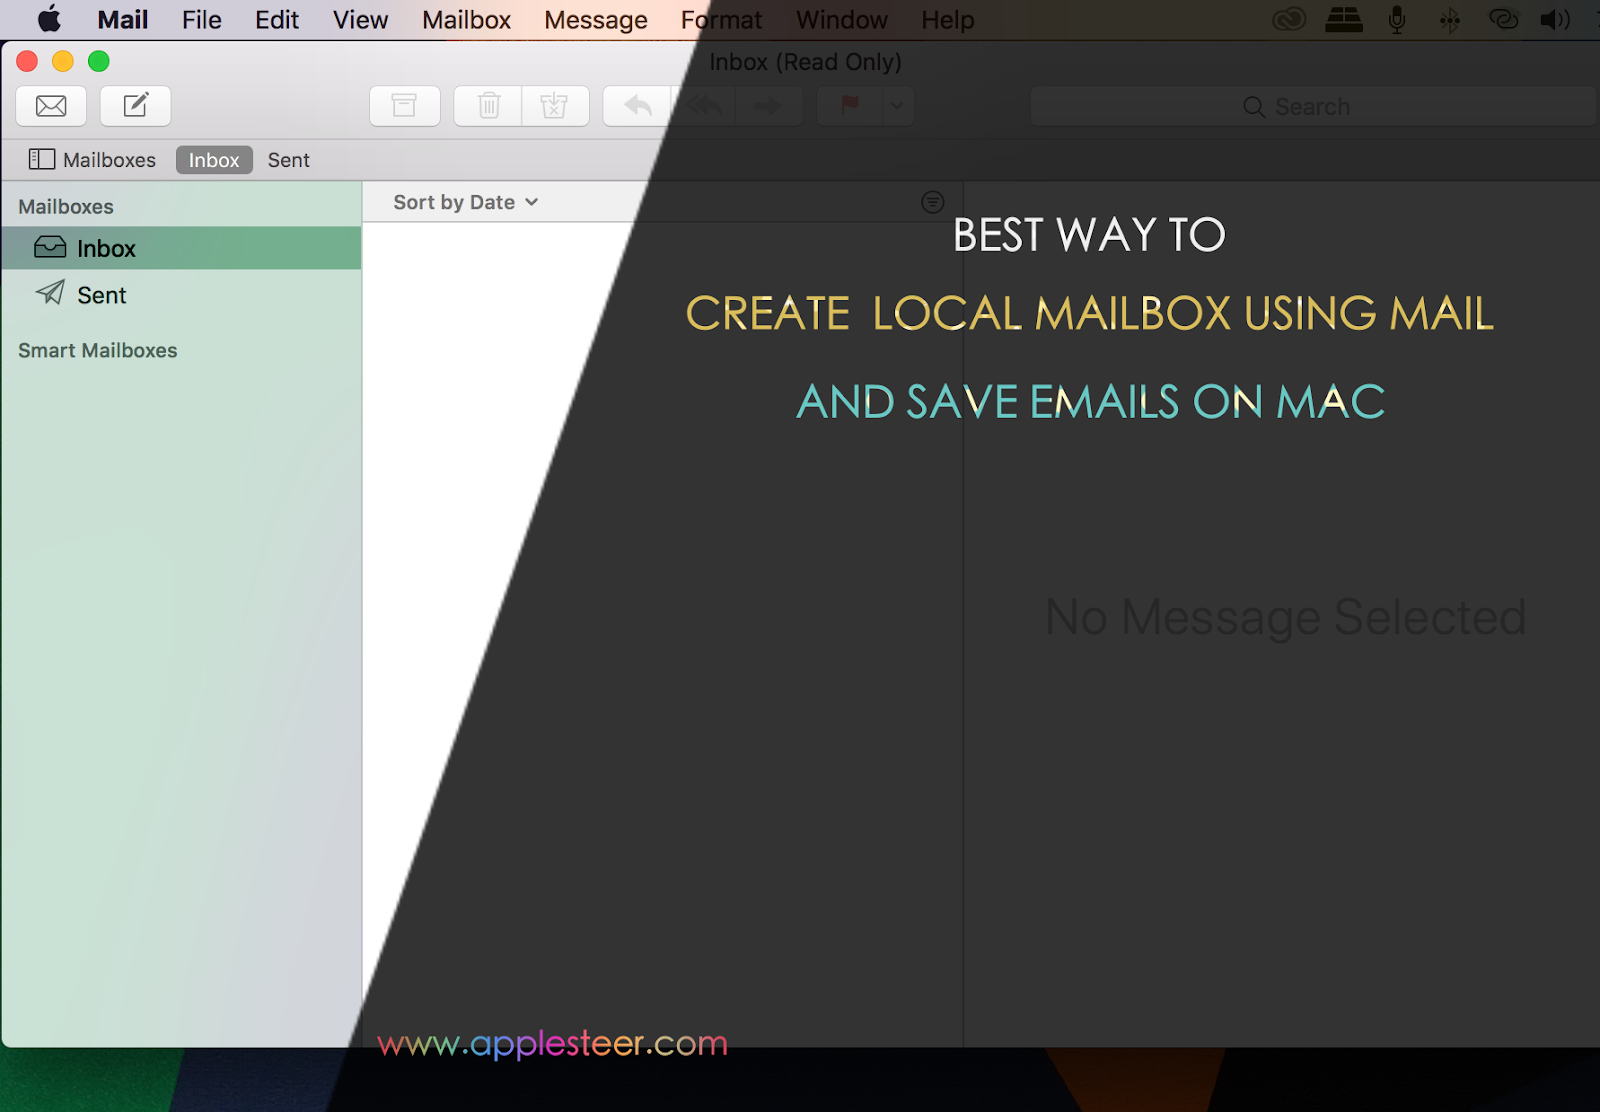 create-local-mailbox-using-mail-save-emails-on-mac